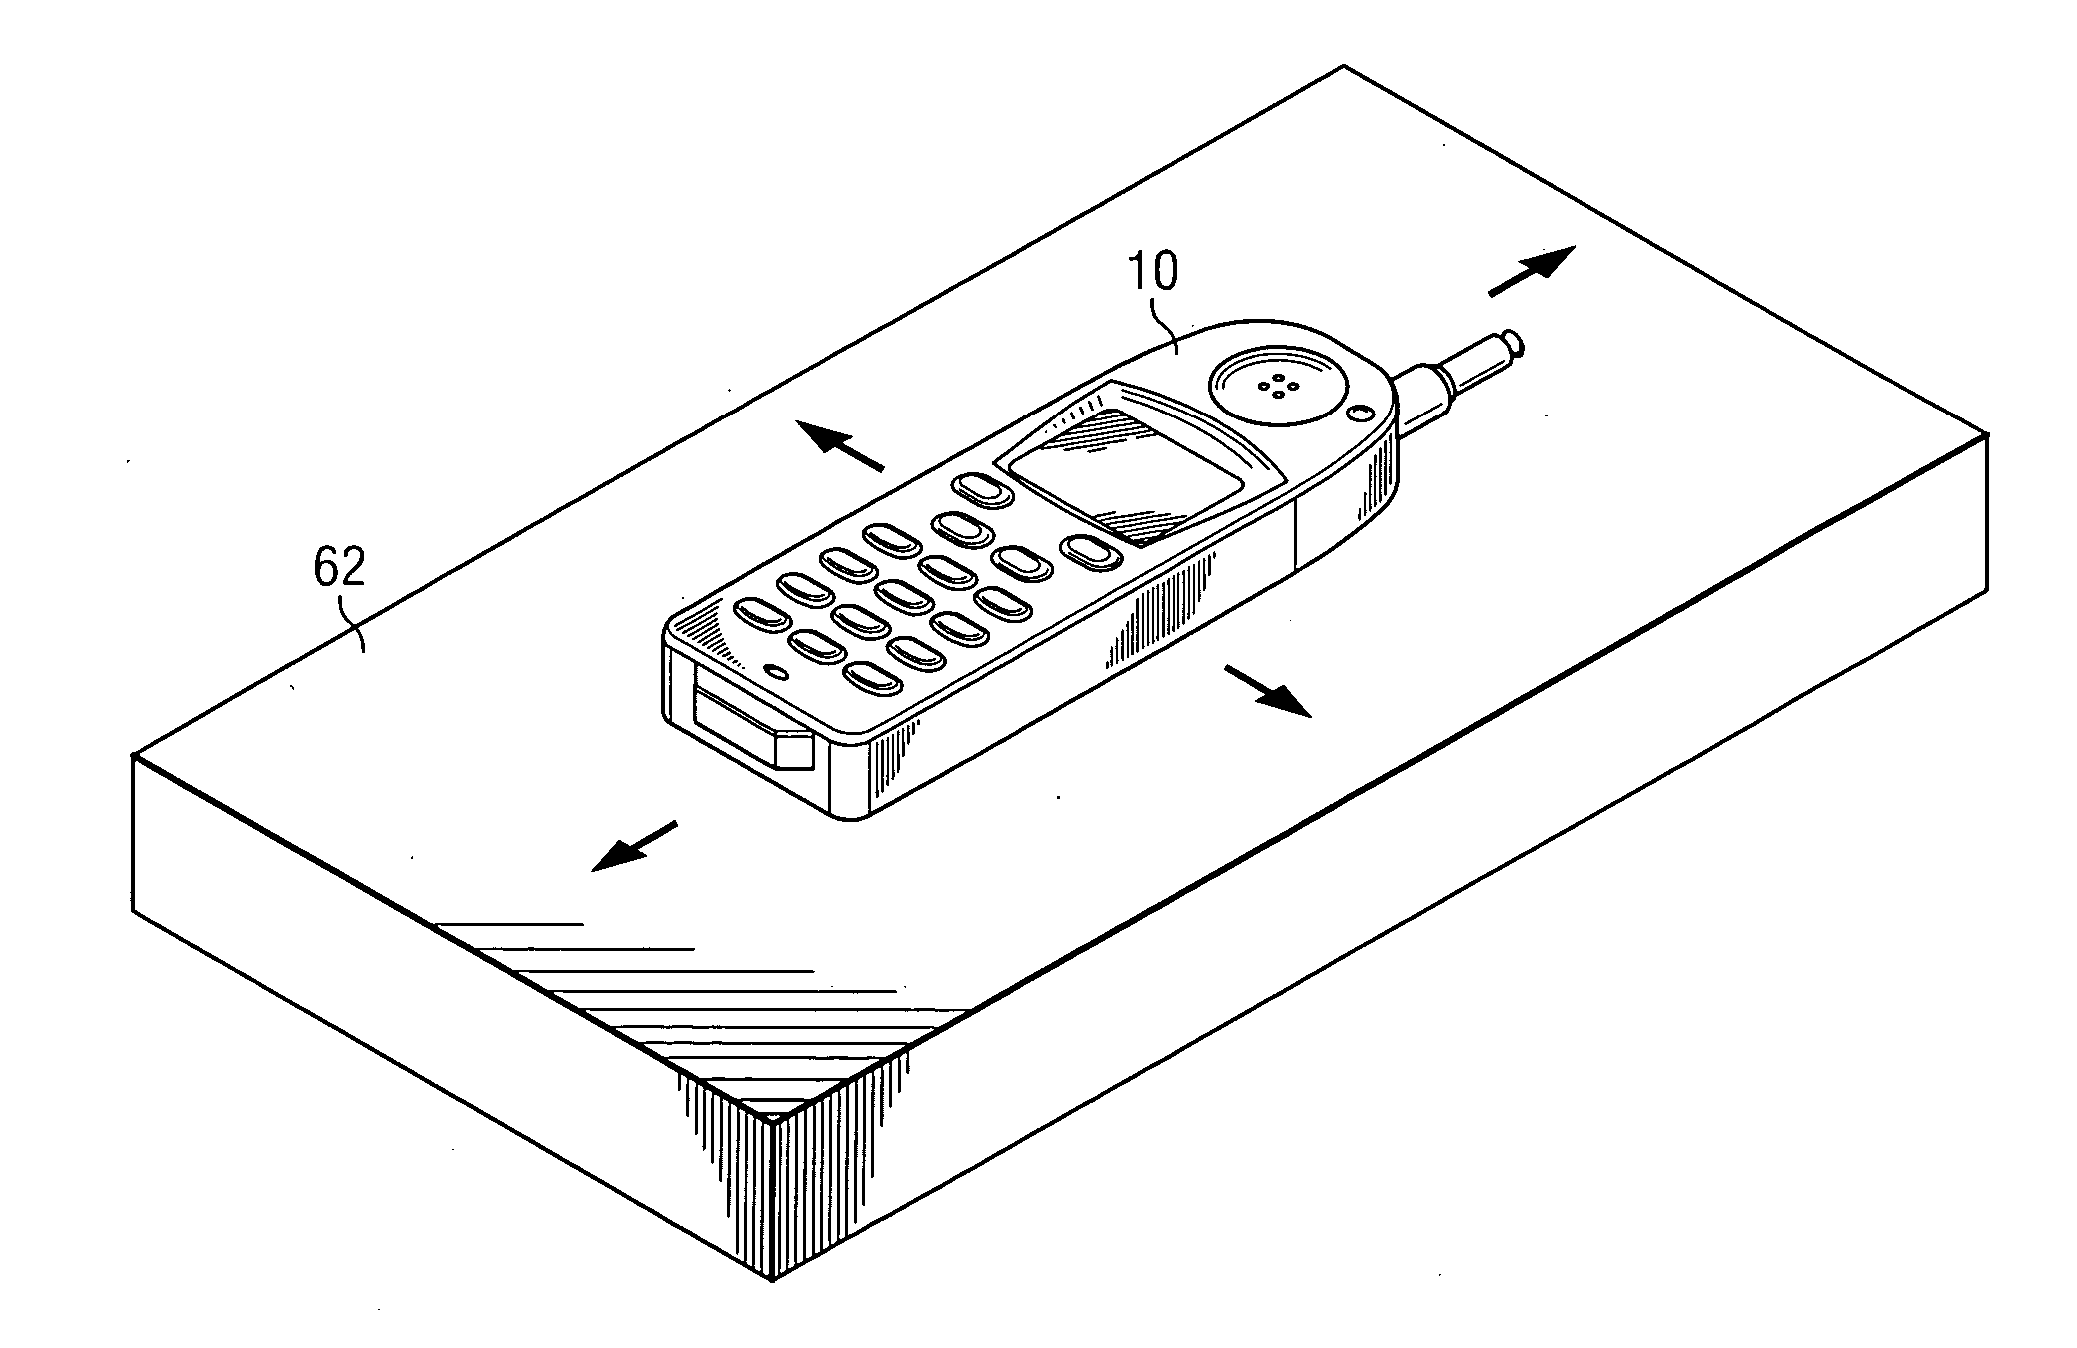 Wireless telephone handset with internet browsing capability